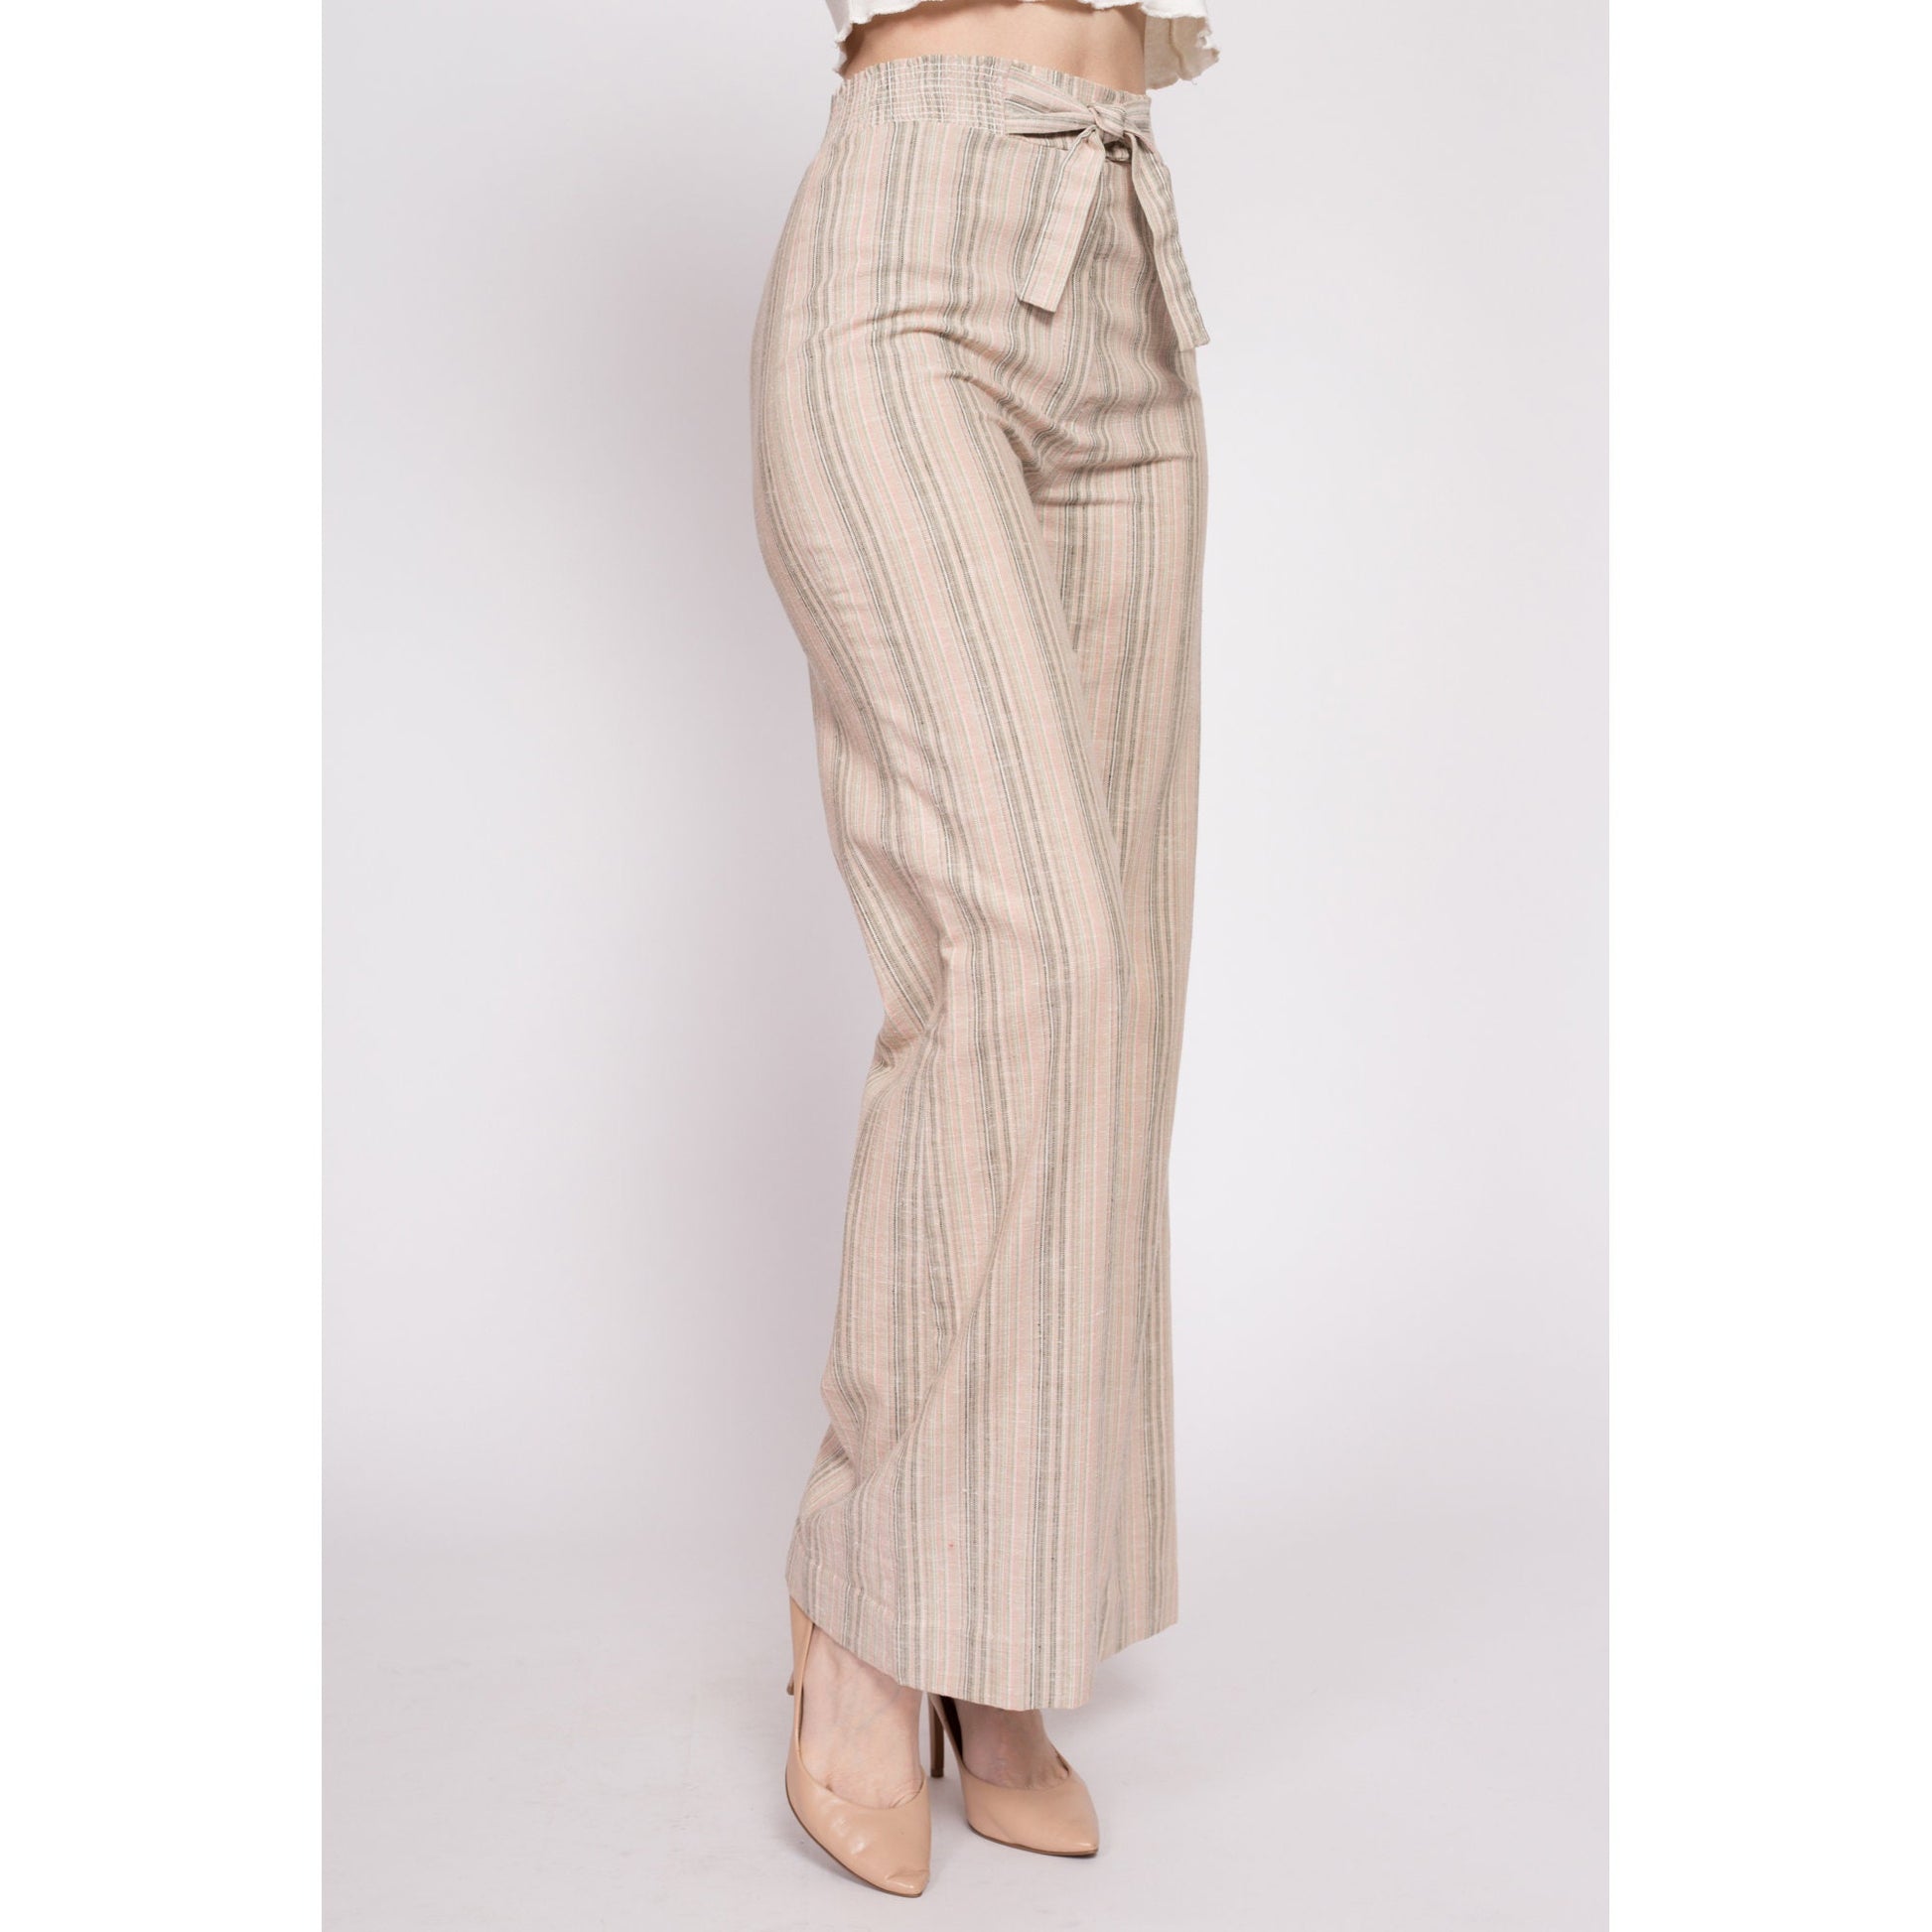 70s Striped High Waisted Flared Pants - XS to Small – Flying Apple Vintage